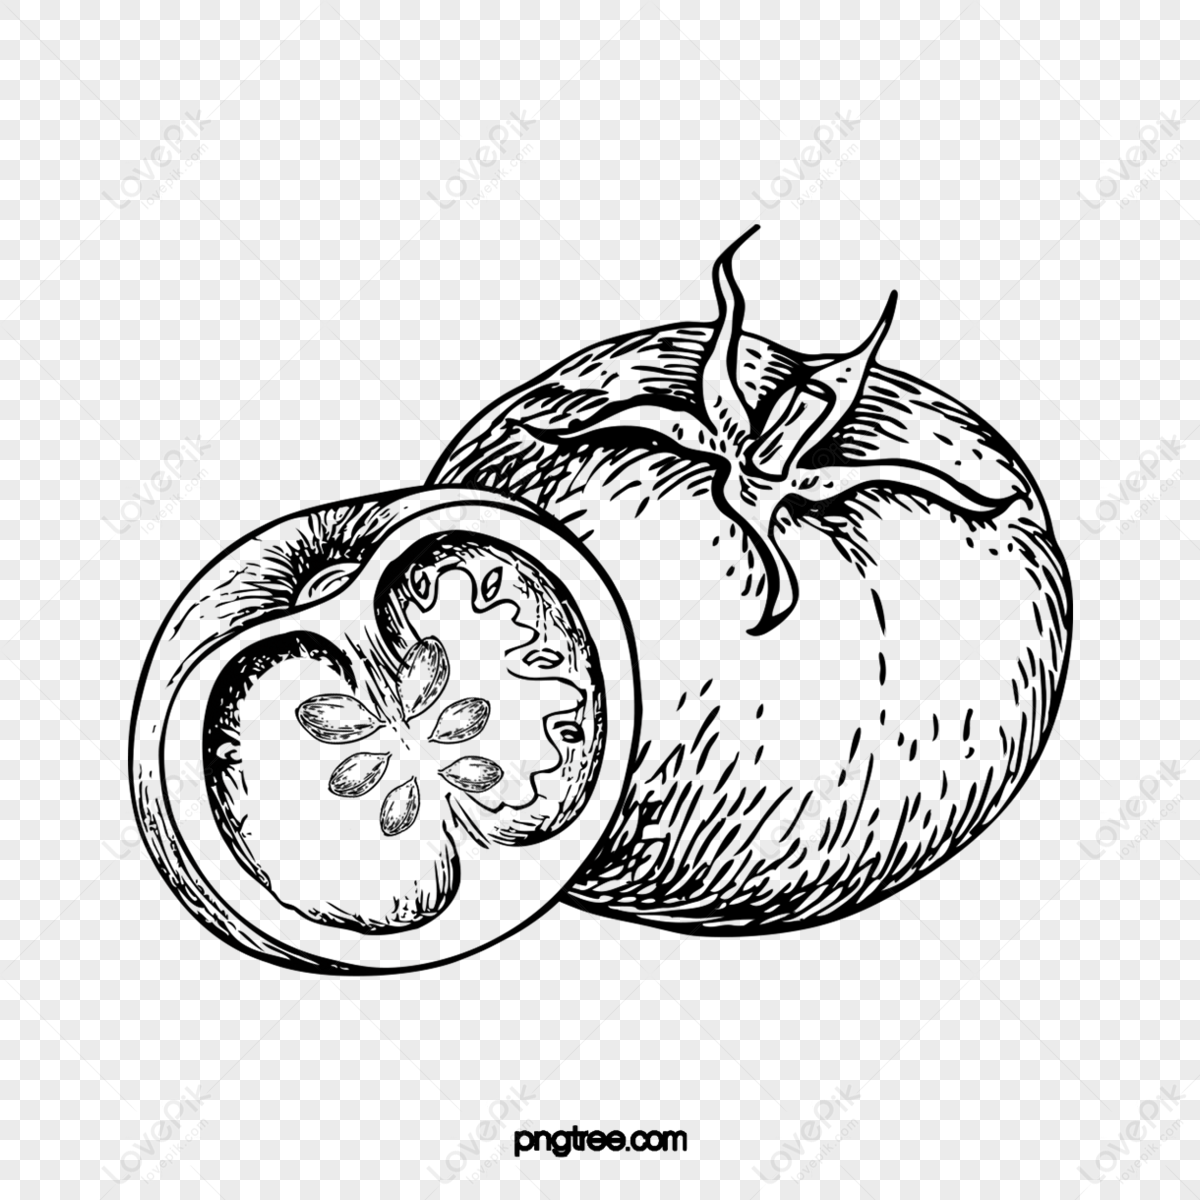 Tomato Sketch PNG Transparent, Black And White Line Sketch Tomato, Slice,  Sketch, Tomato PNG Image For Free Download